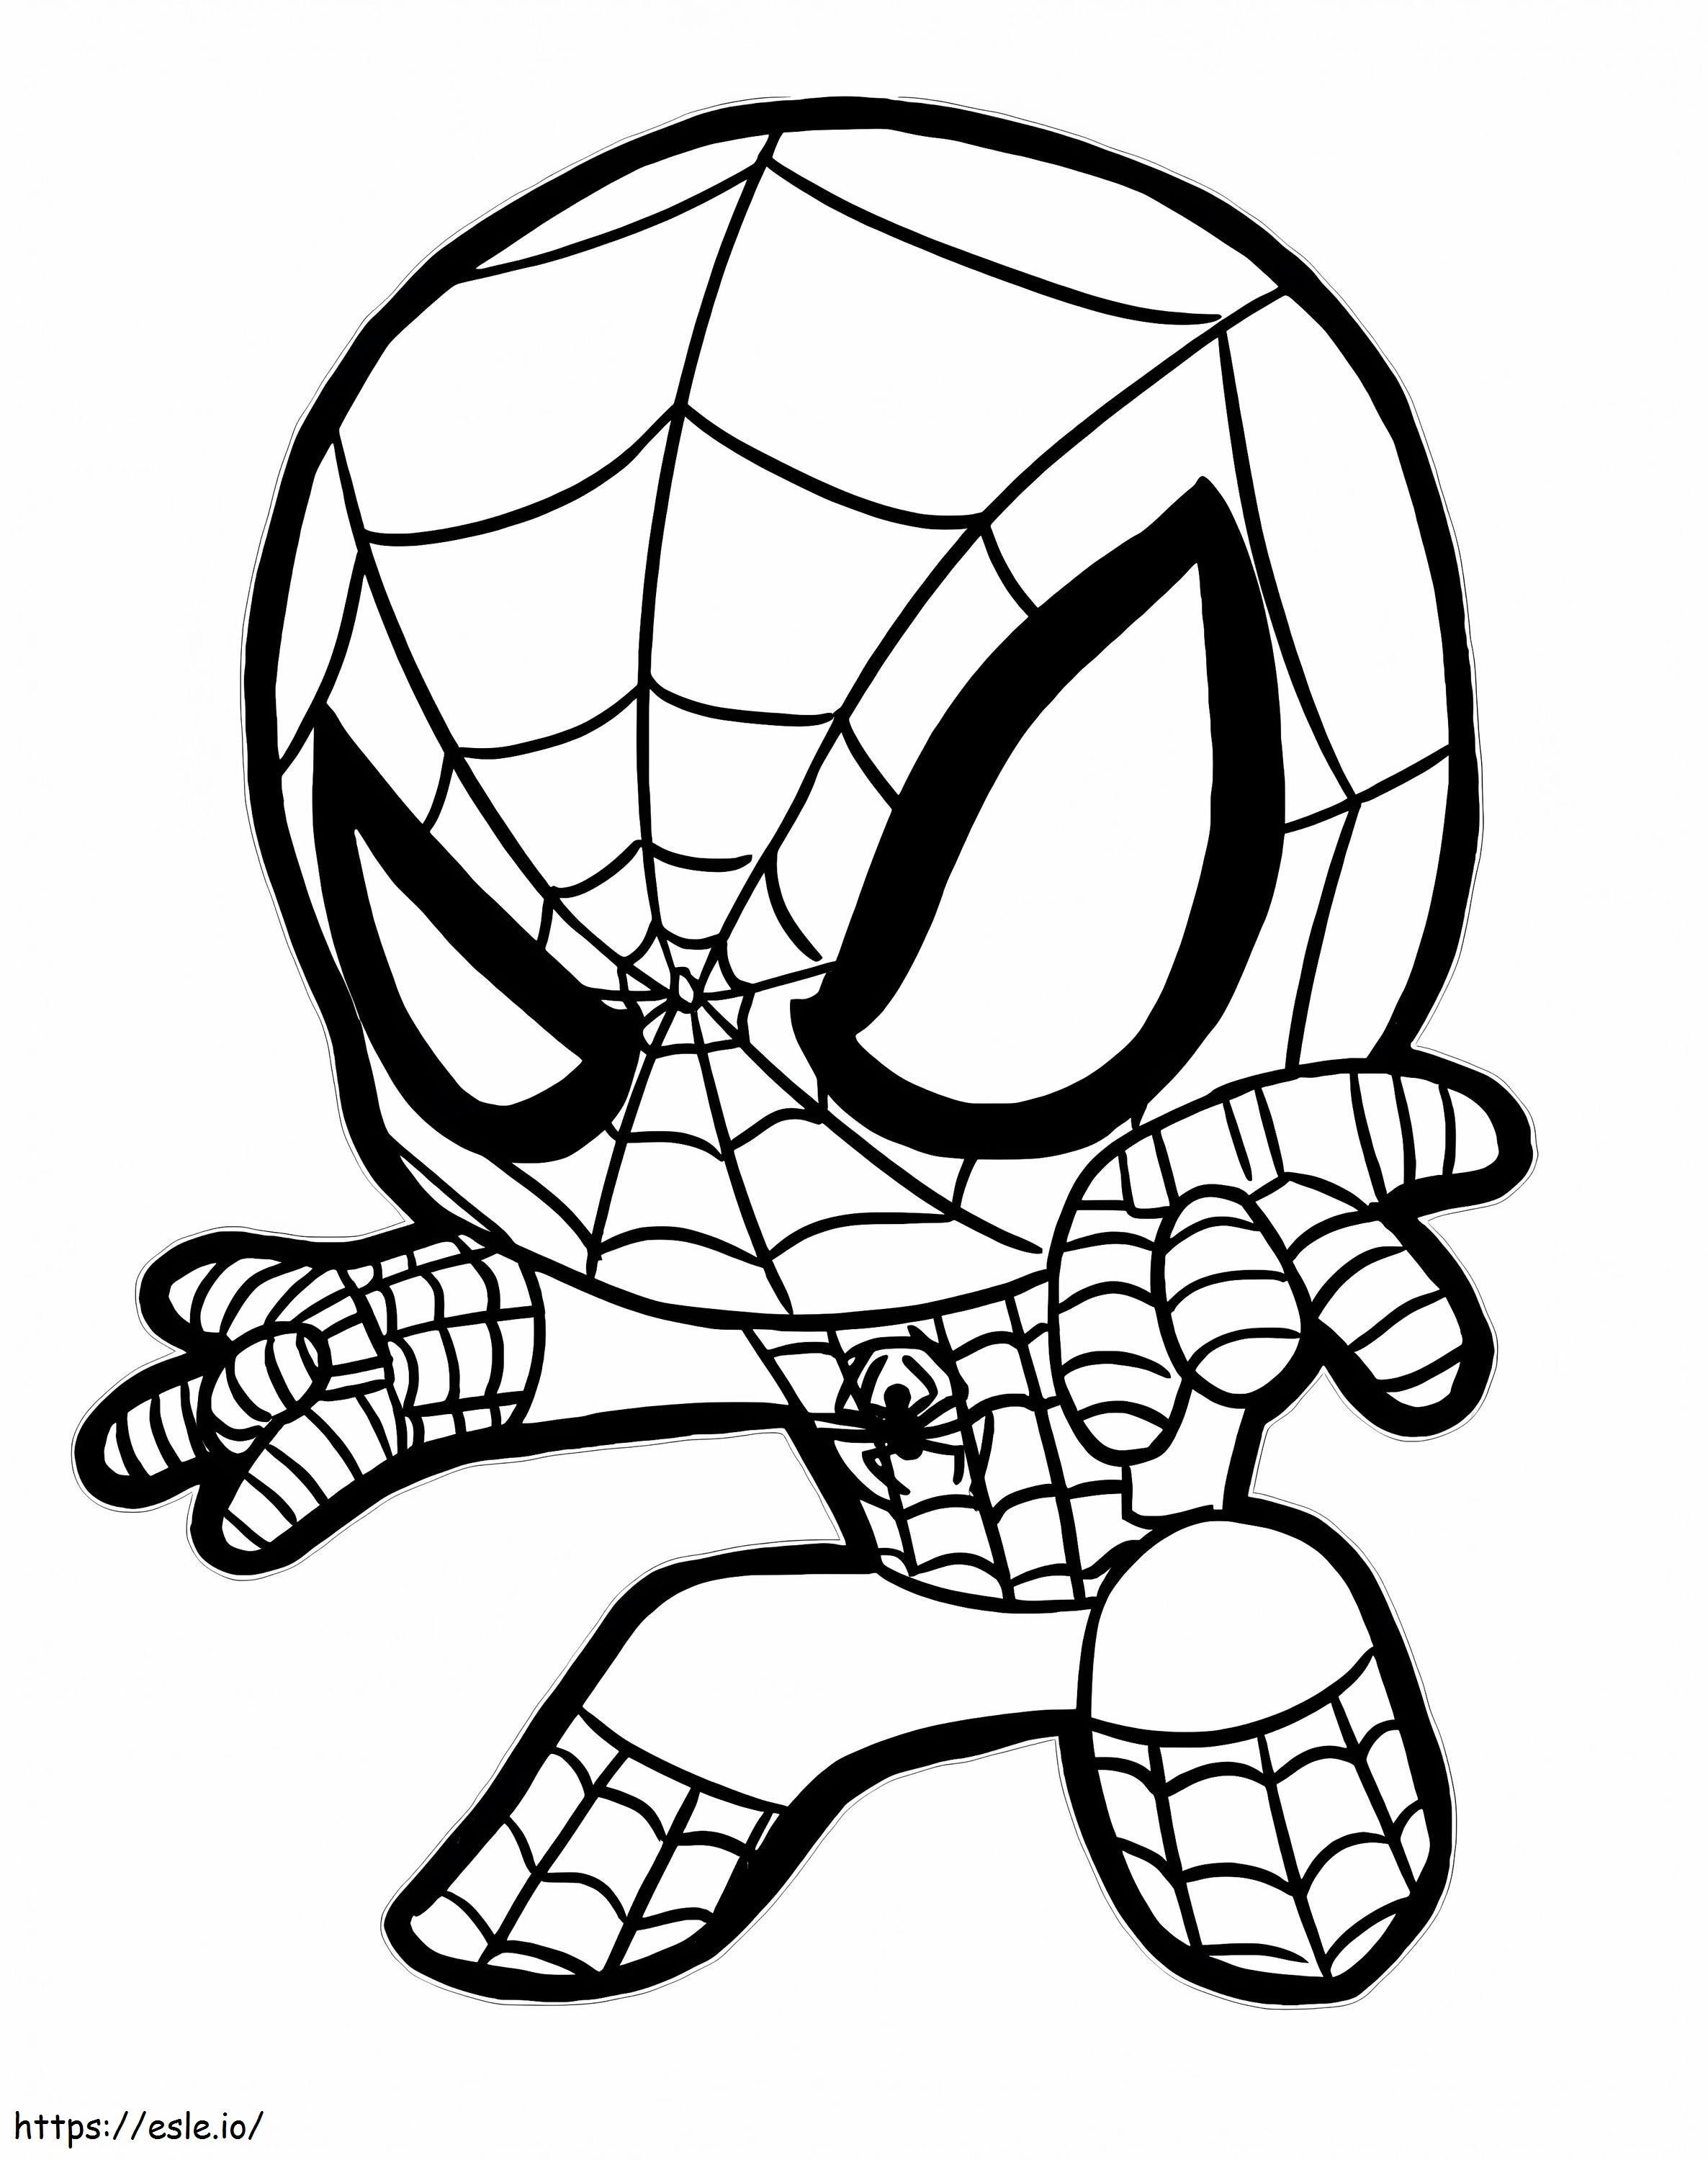 Chibi Spiderman coloring page